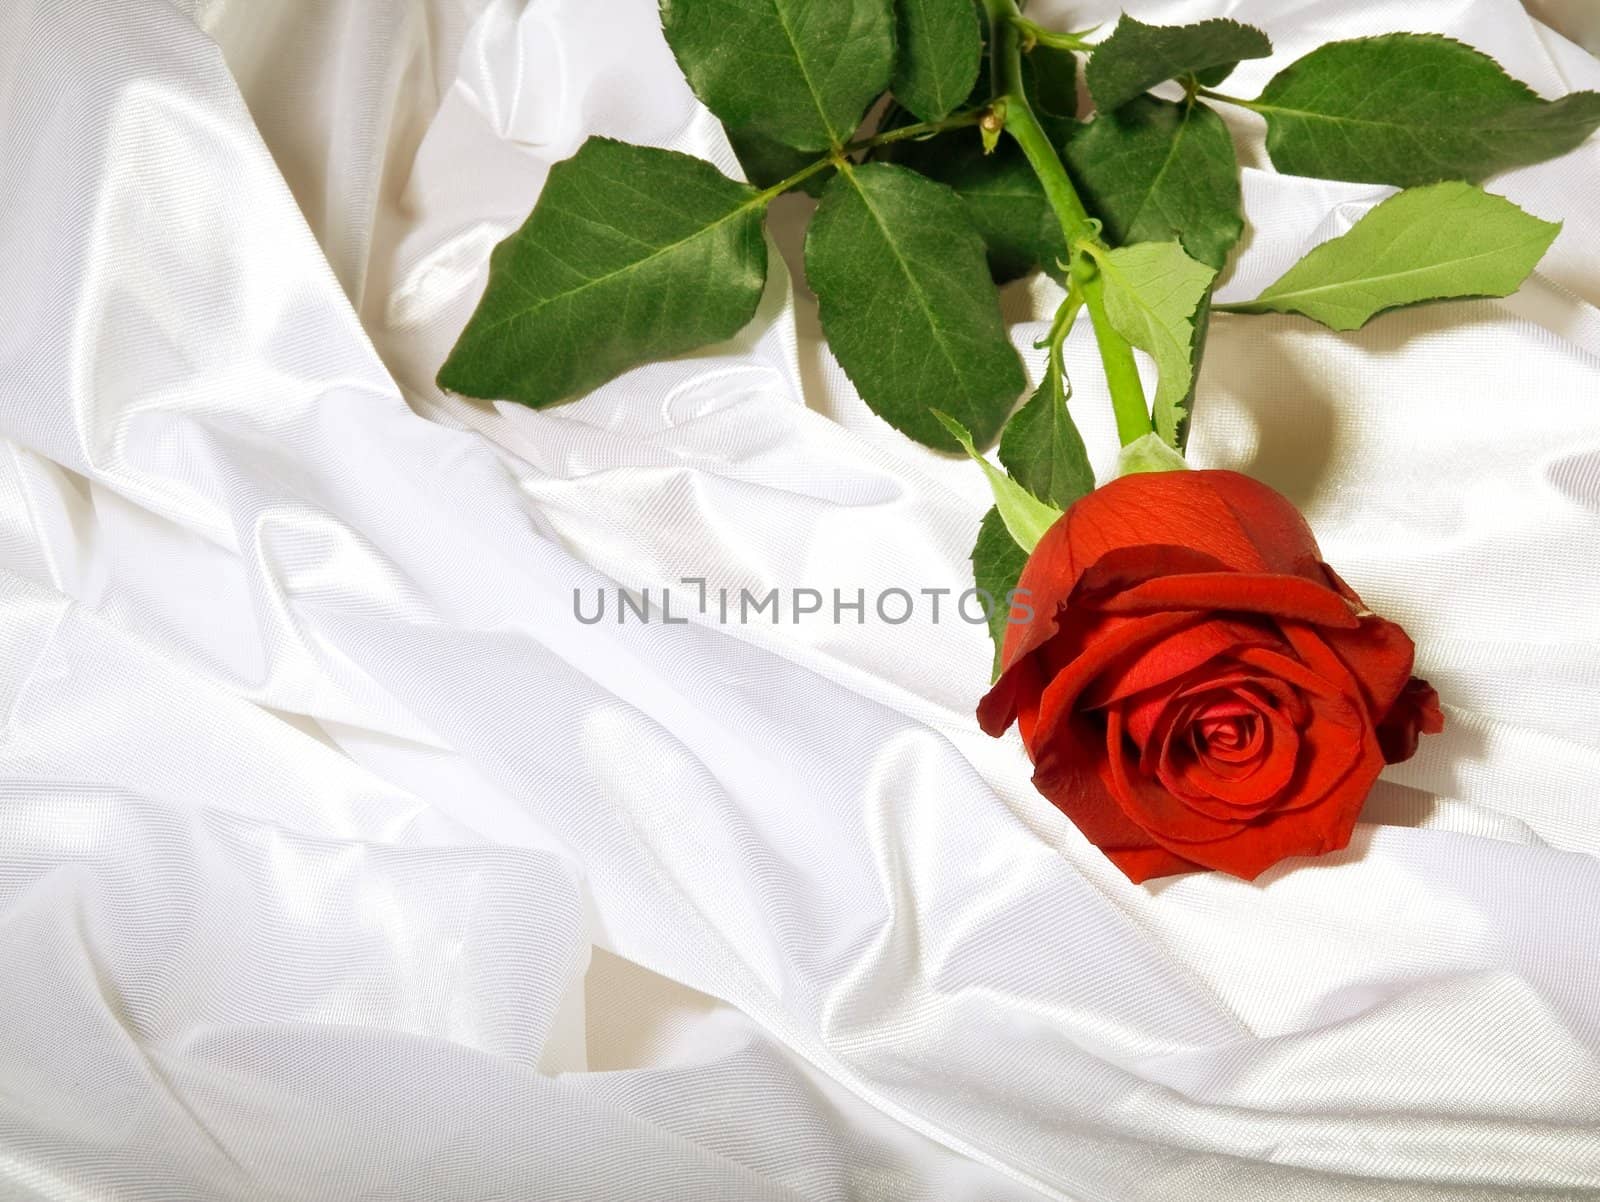 Red rose with green leaves among the folds of a white textured textile